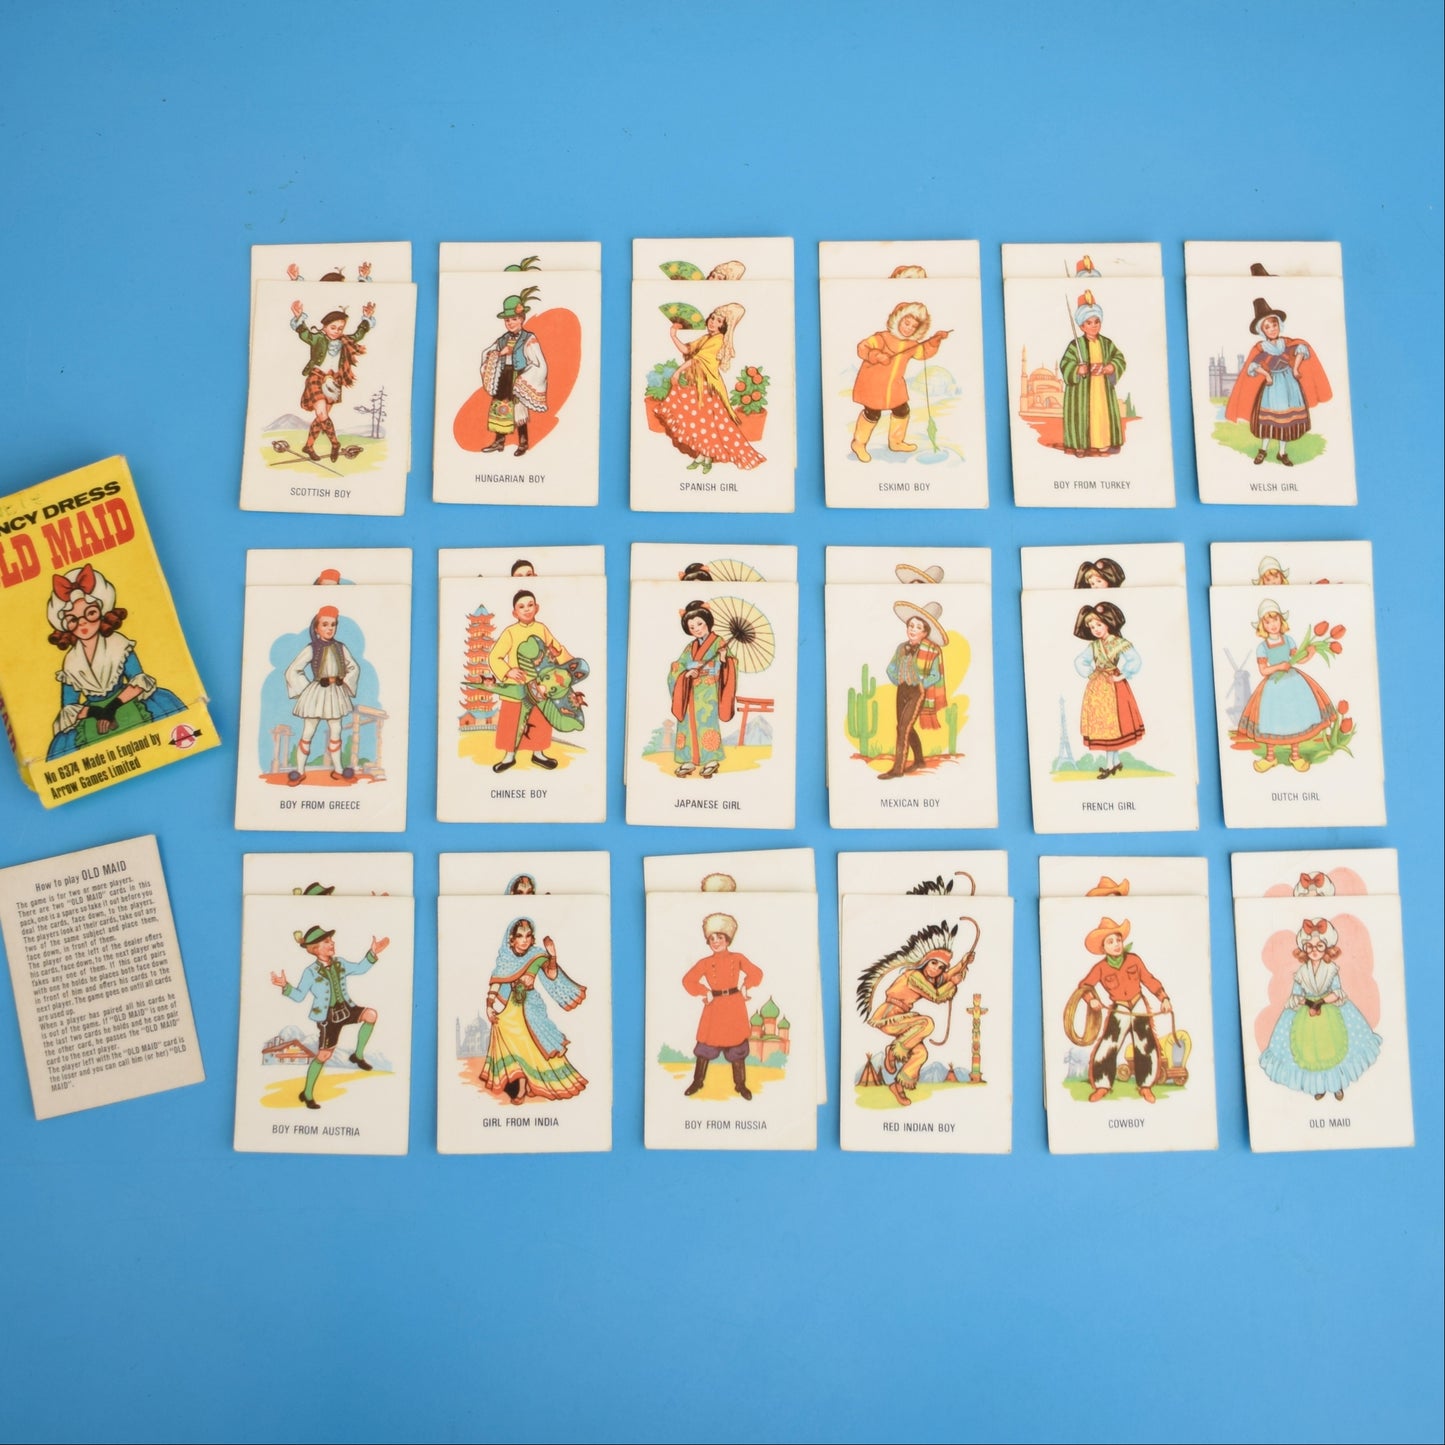 Vintage 1970s Old Maid Card Game - Great Images